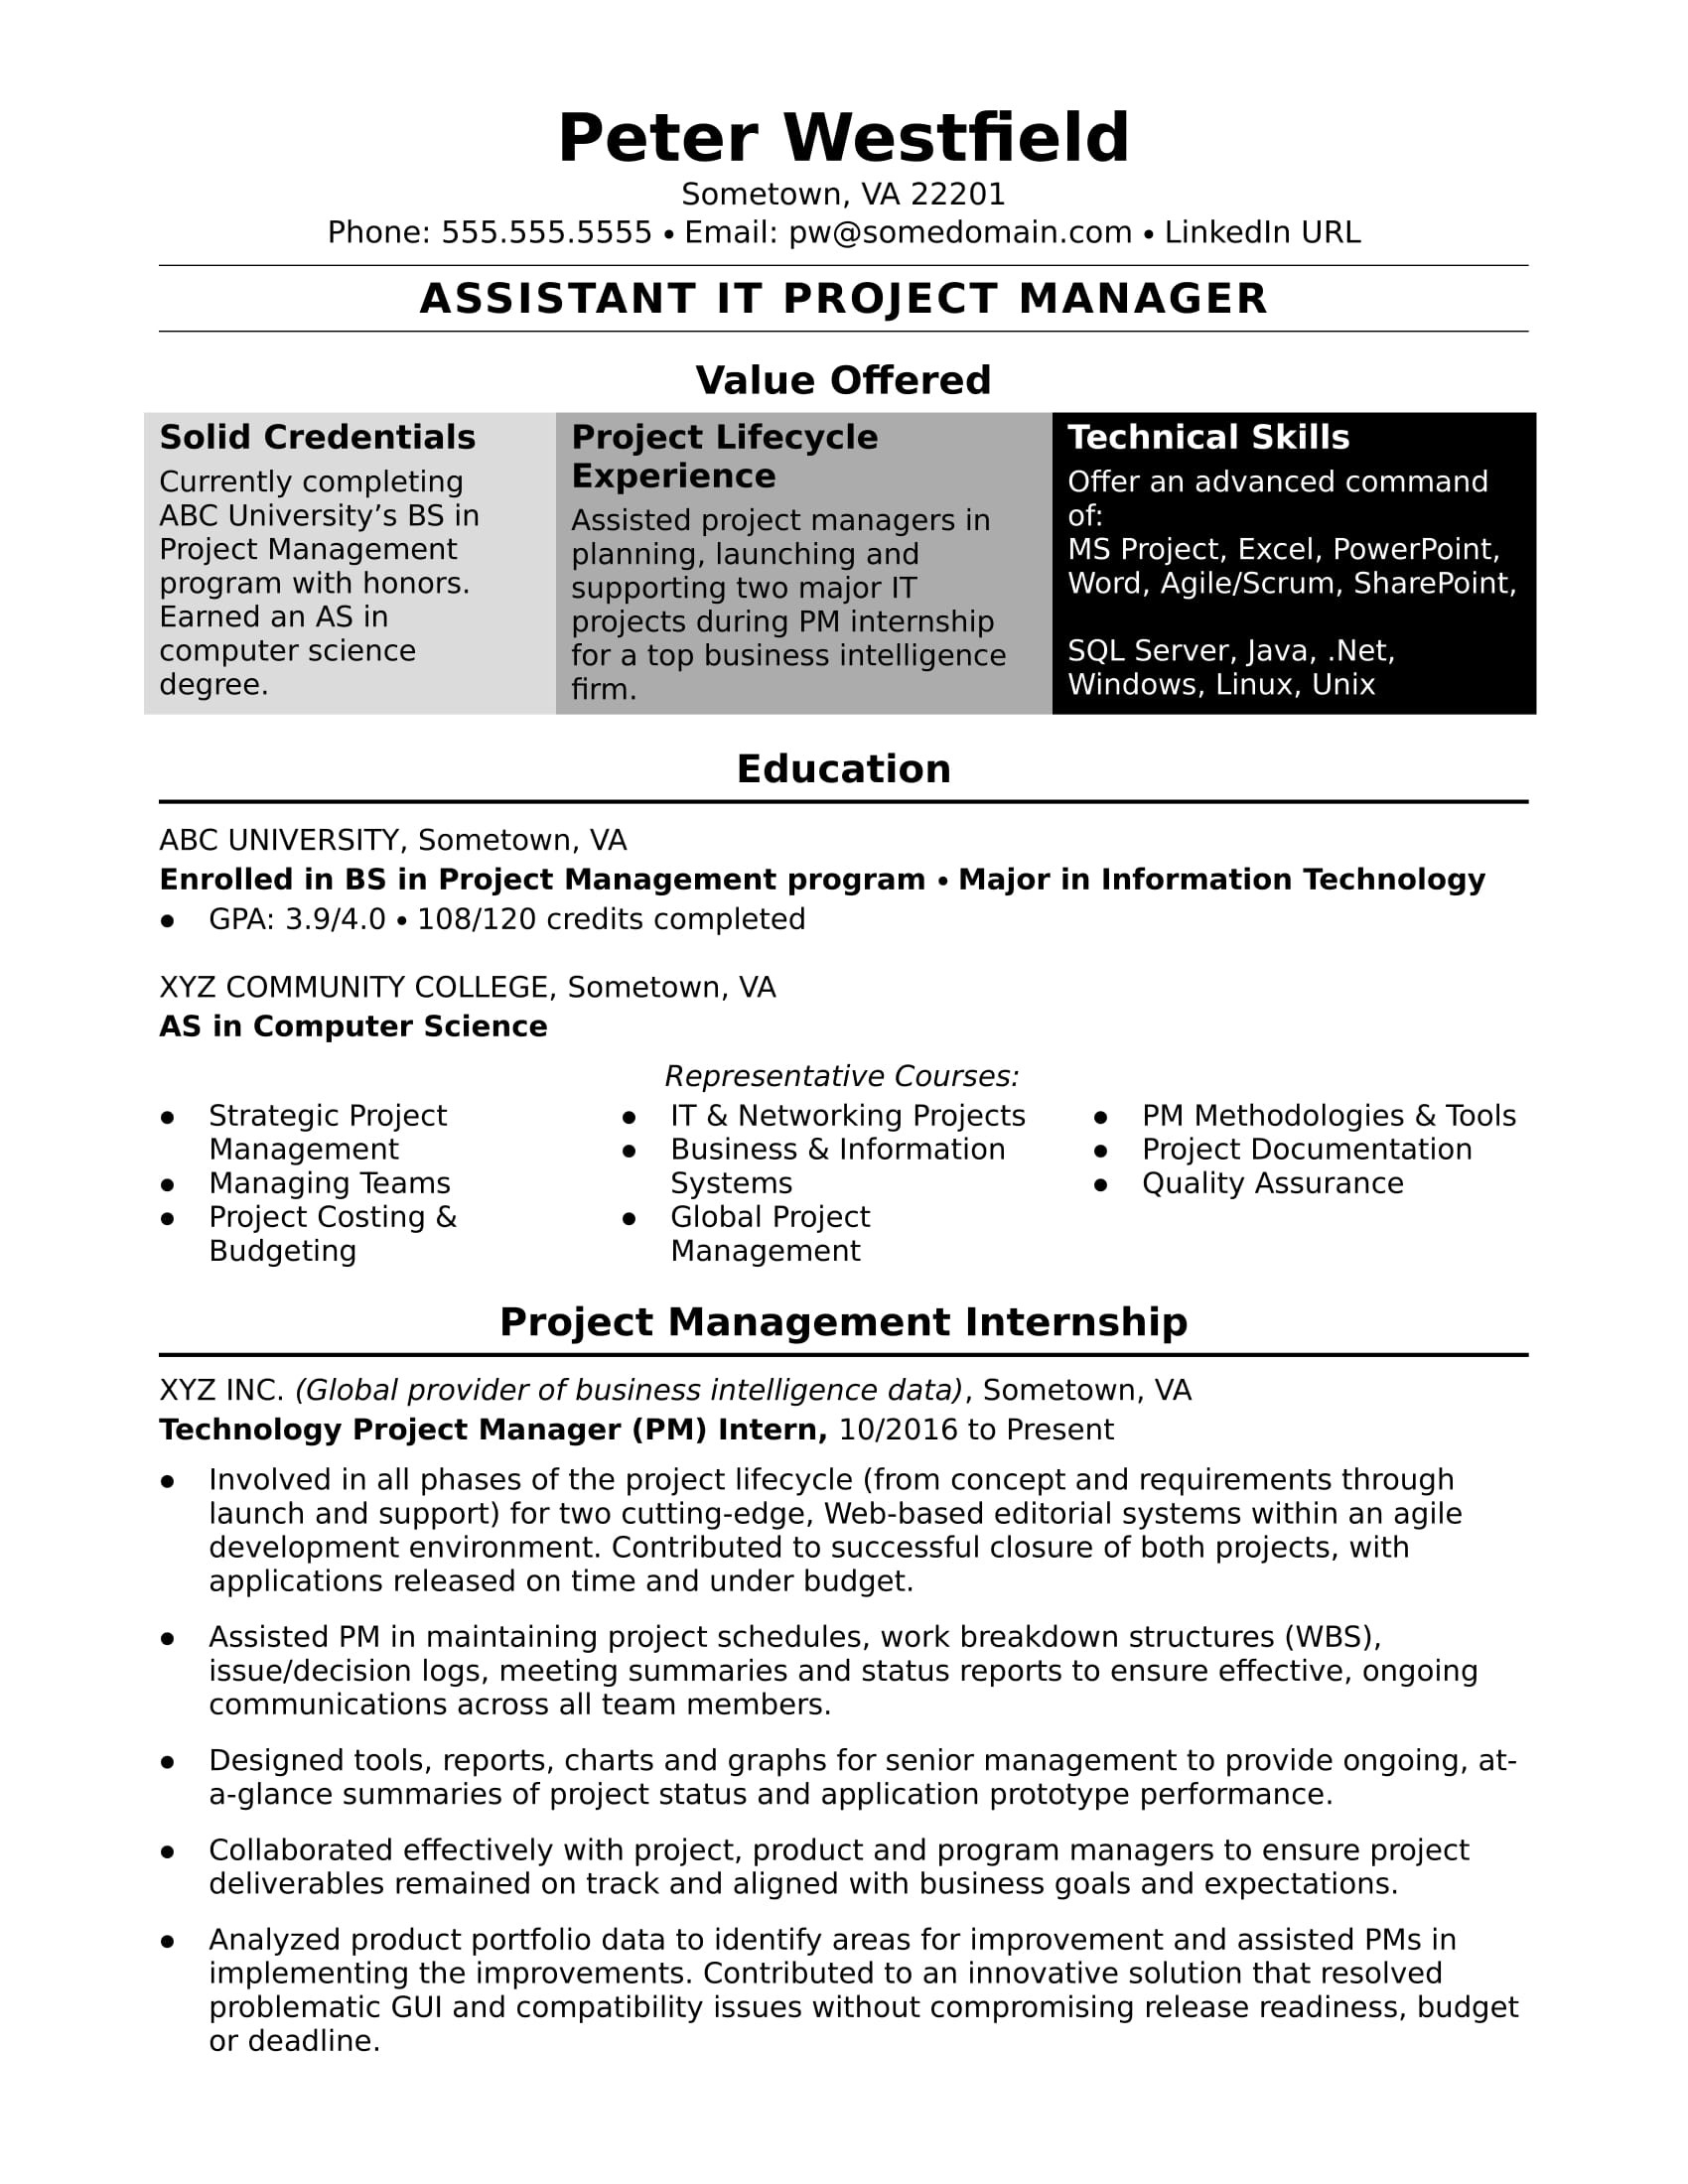 Sample Resume for Project Manager It software India Sample Resume for An assistant It Project Manager Monster.com